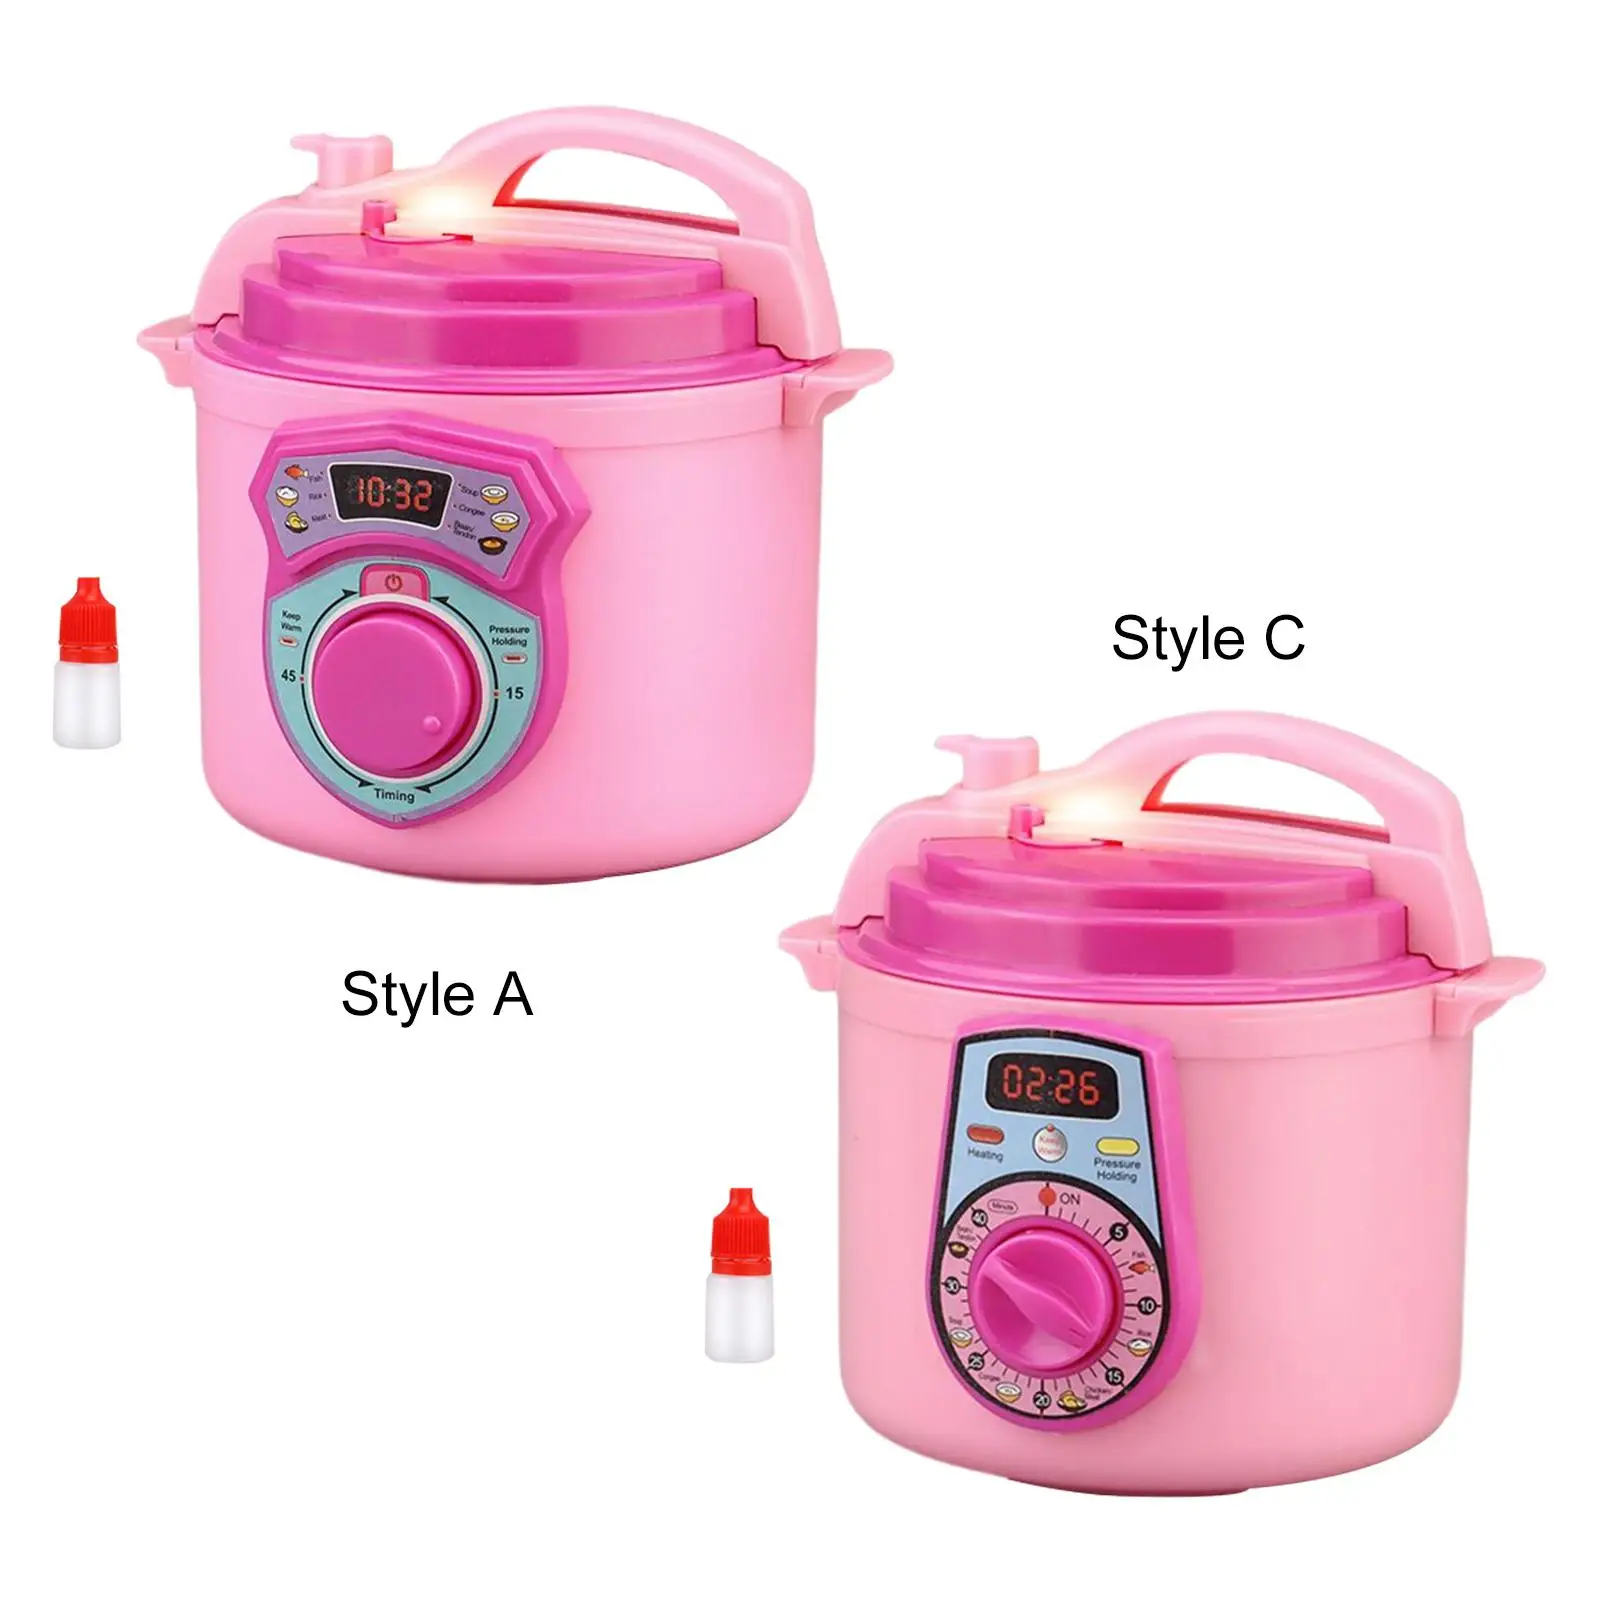 Simulation Electric Rice Cooker Play Role Game Early Learning Educational Toy for Girls Kids